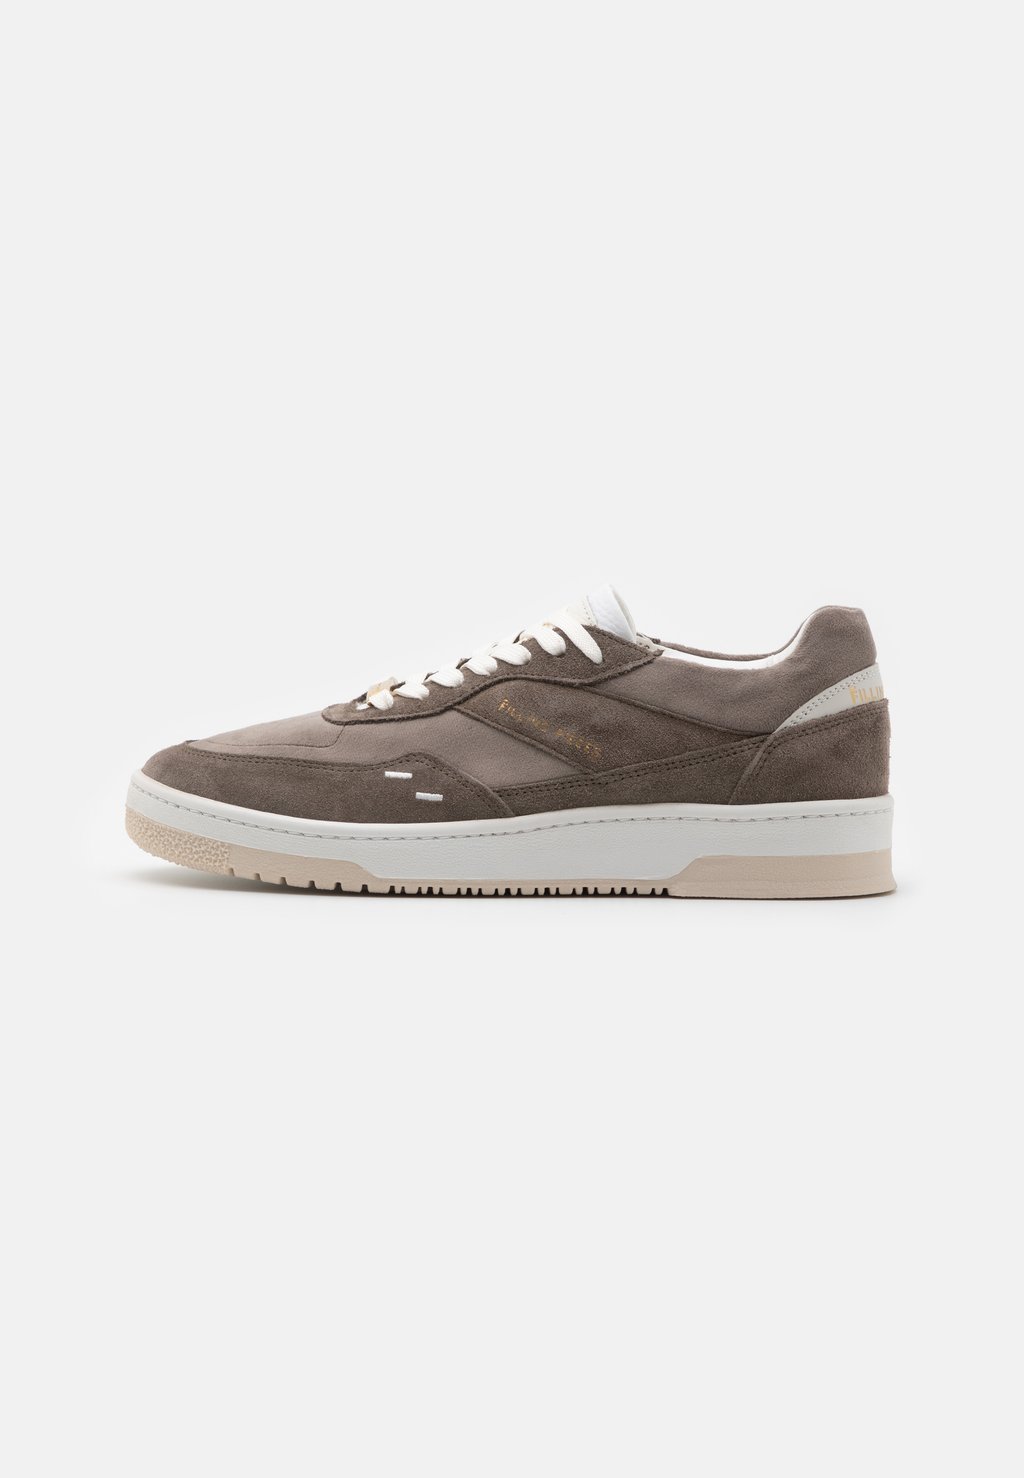 Кроссовки Filling Pieces ACE SPIN DICE UNISEX, цвет taupe